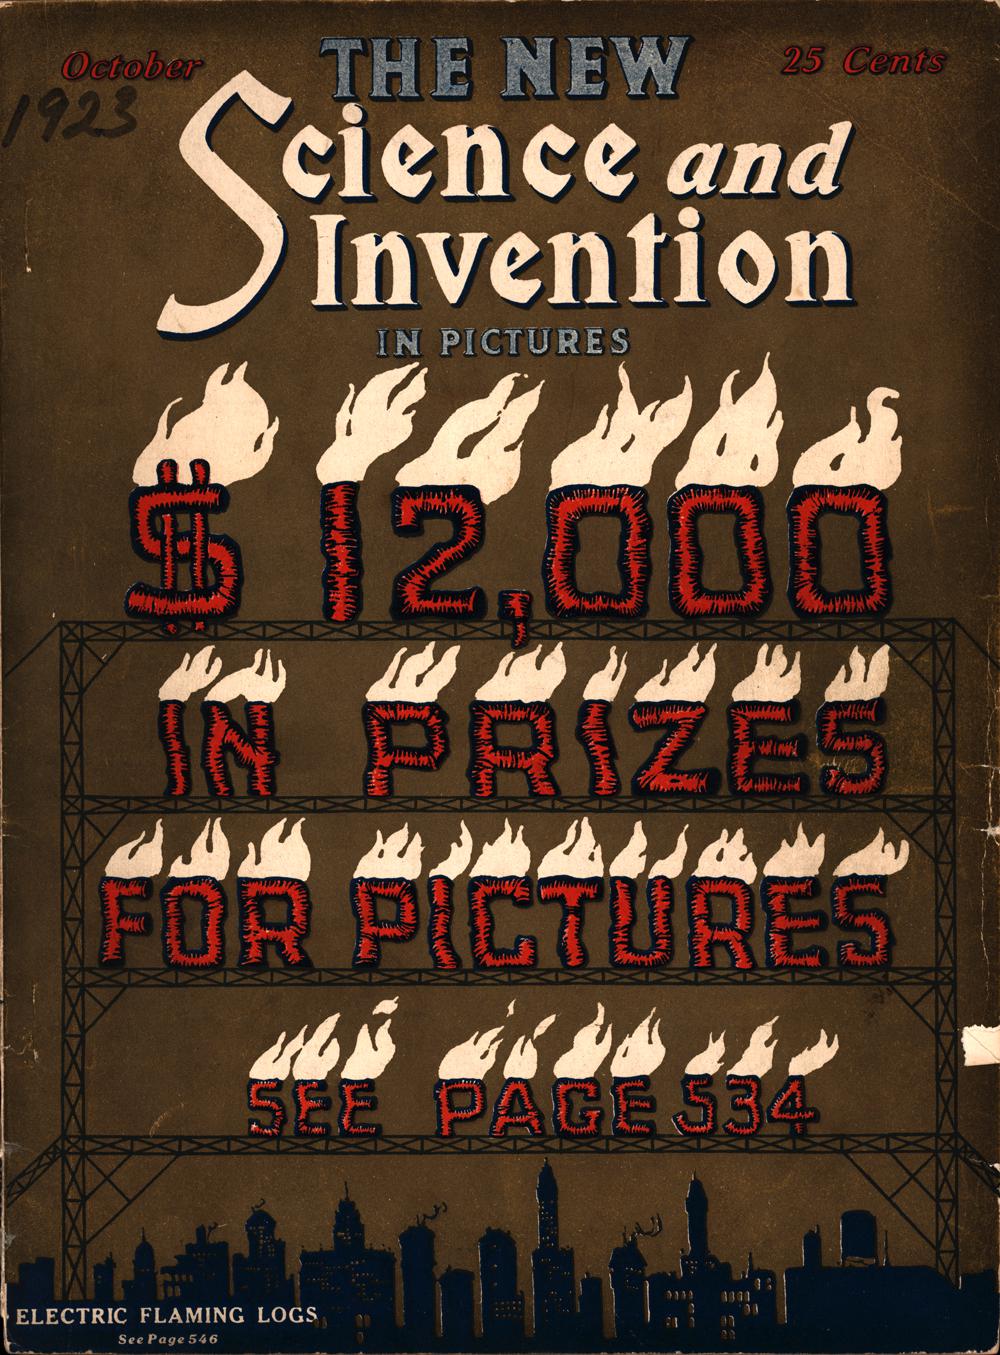 1923 - Science and invention - Vol. 11, No. 6